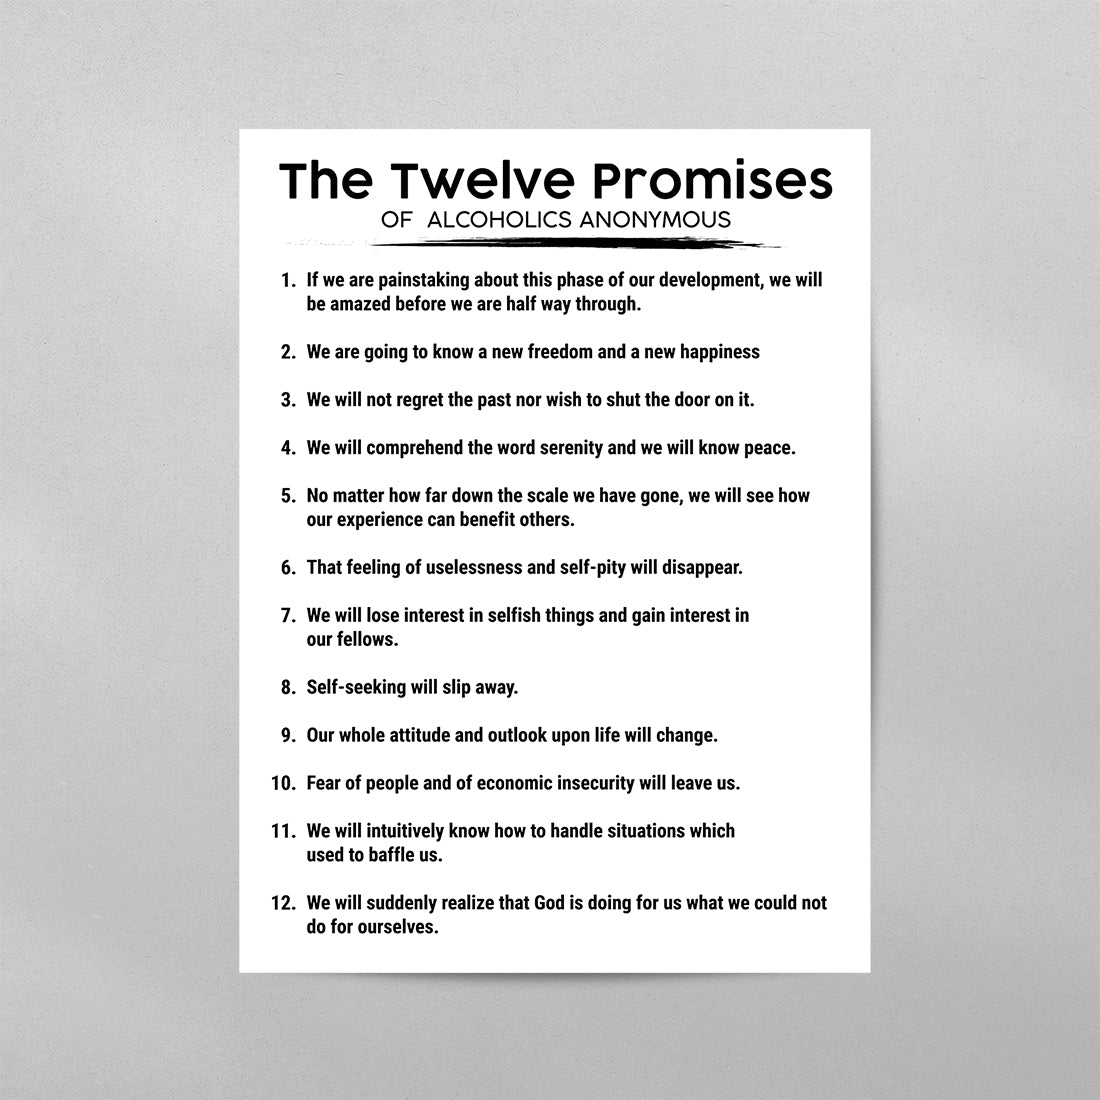 The 12 Promises of AA